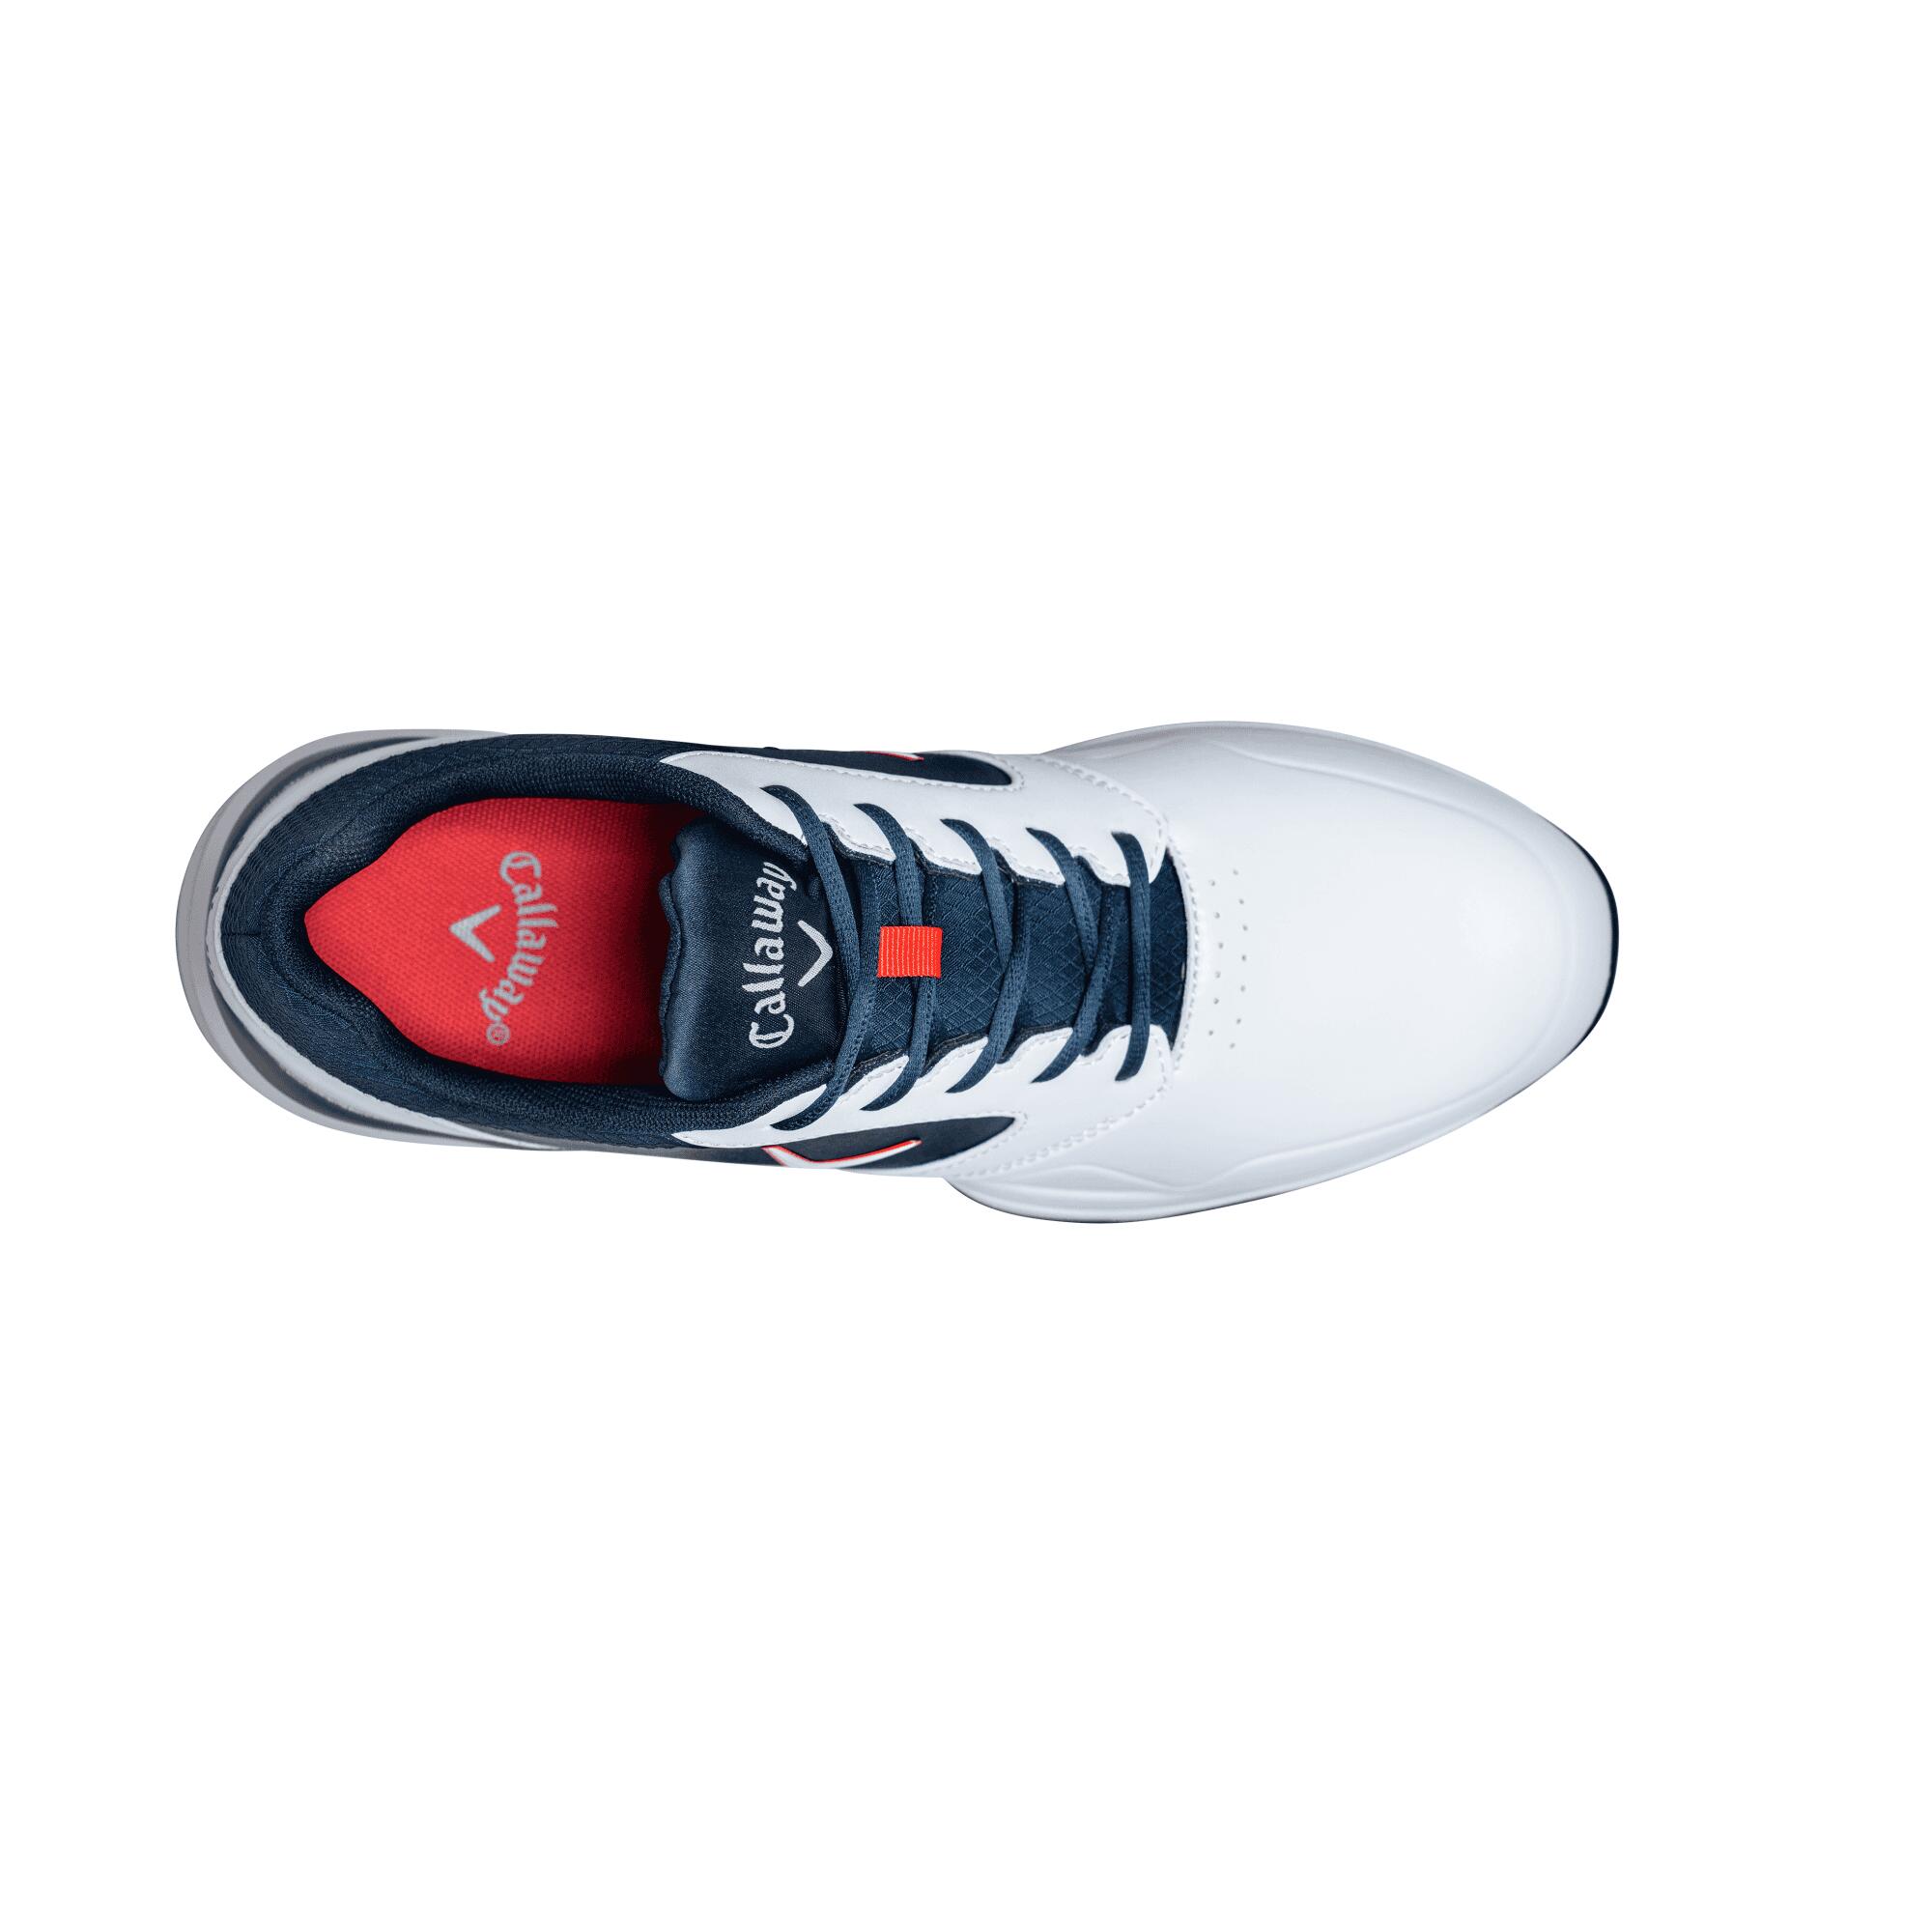 Callaway 2022 Mens CHEV LS Golf Shoes WHITE/NAVY/RED 3/7